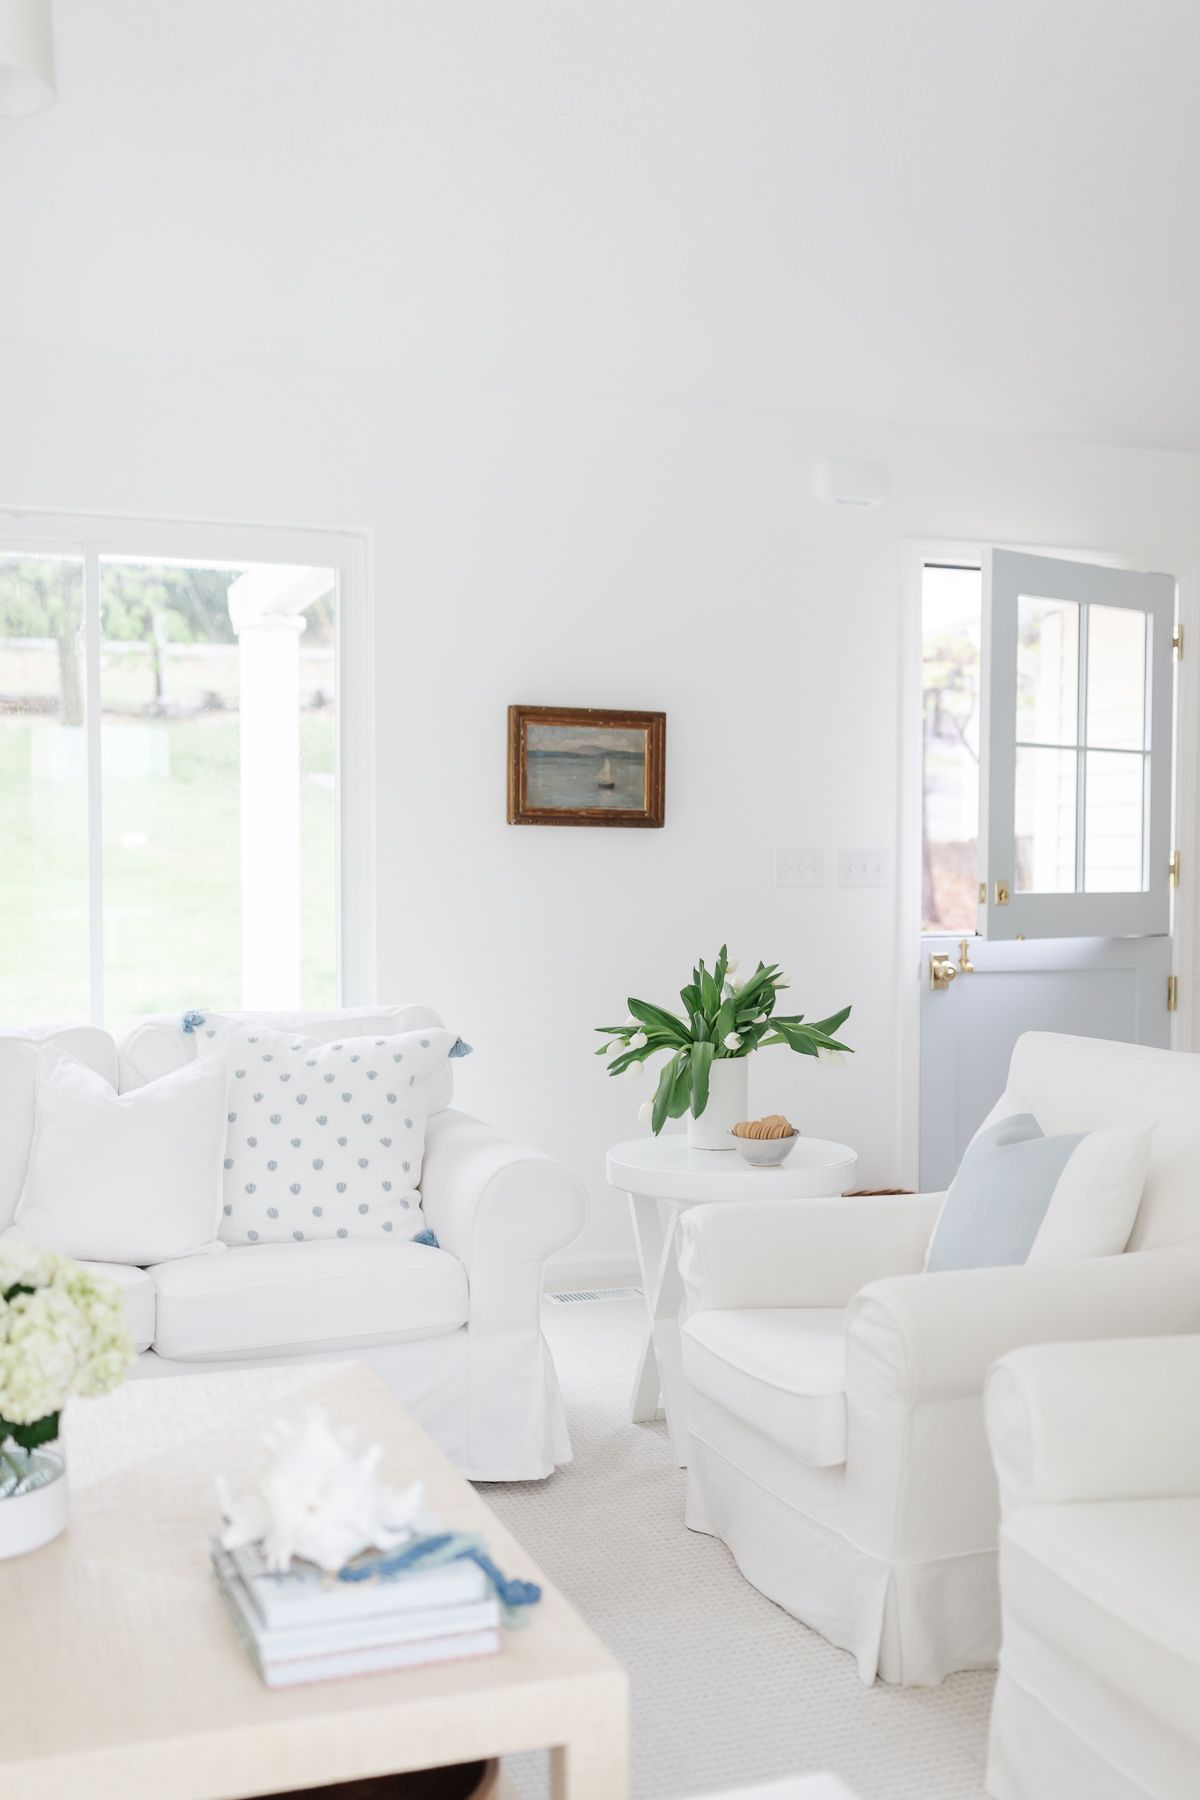 a white living room with white sofas and pillows in blue and white pillow covers